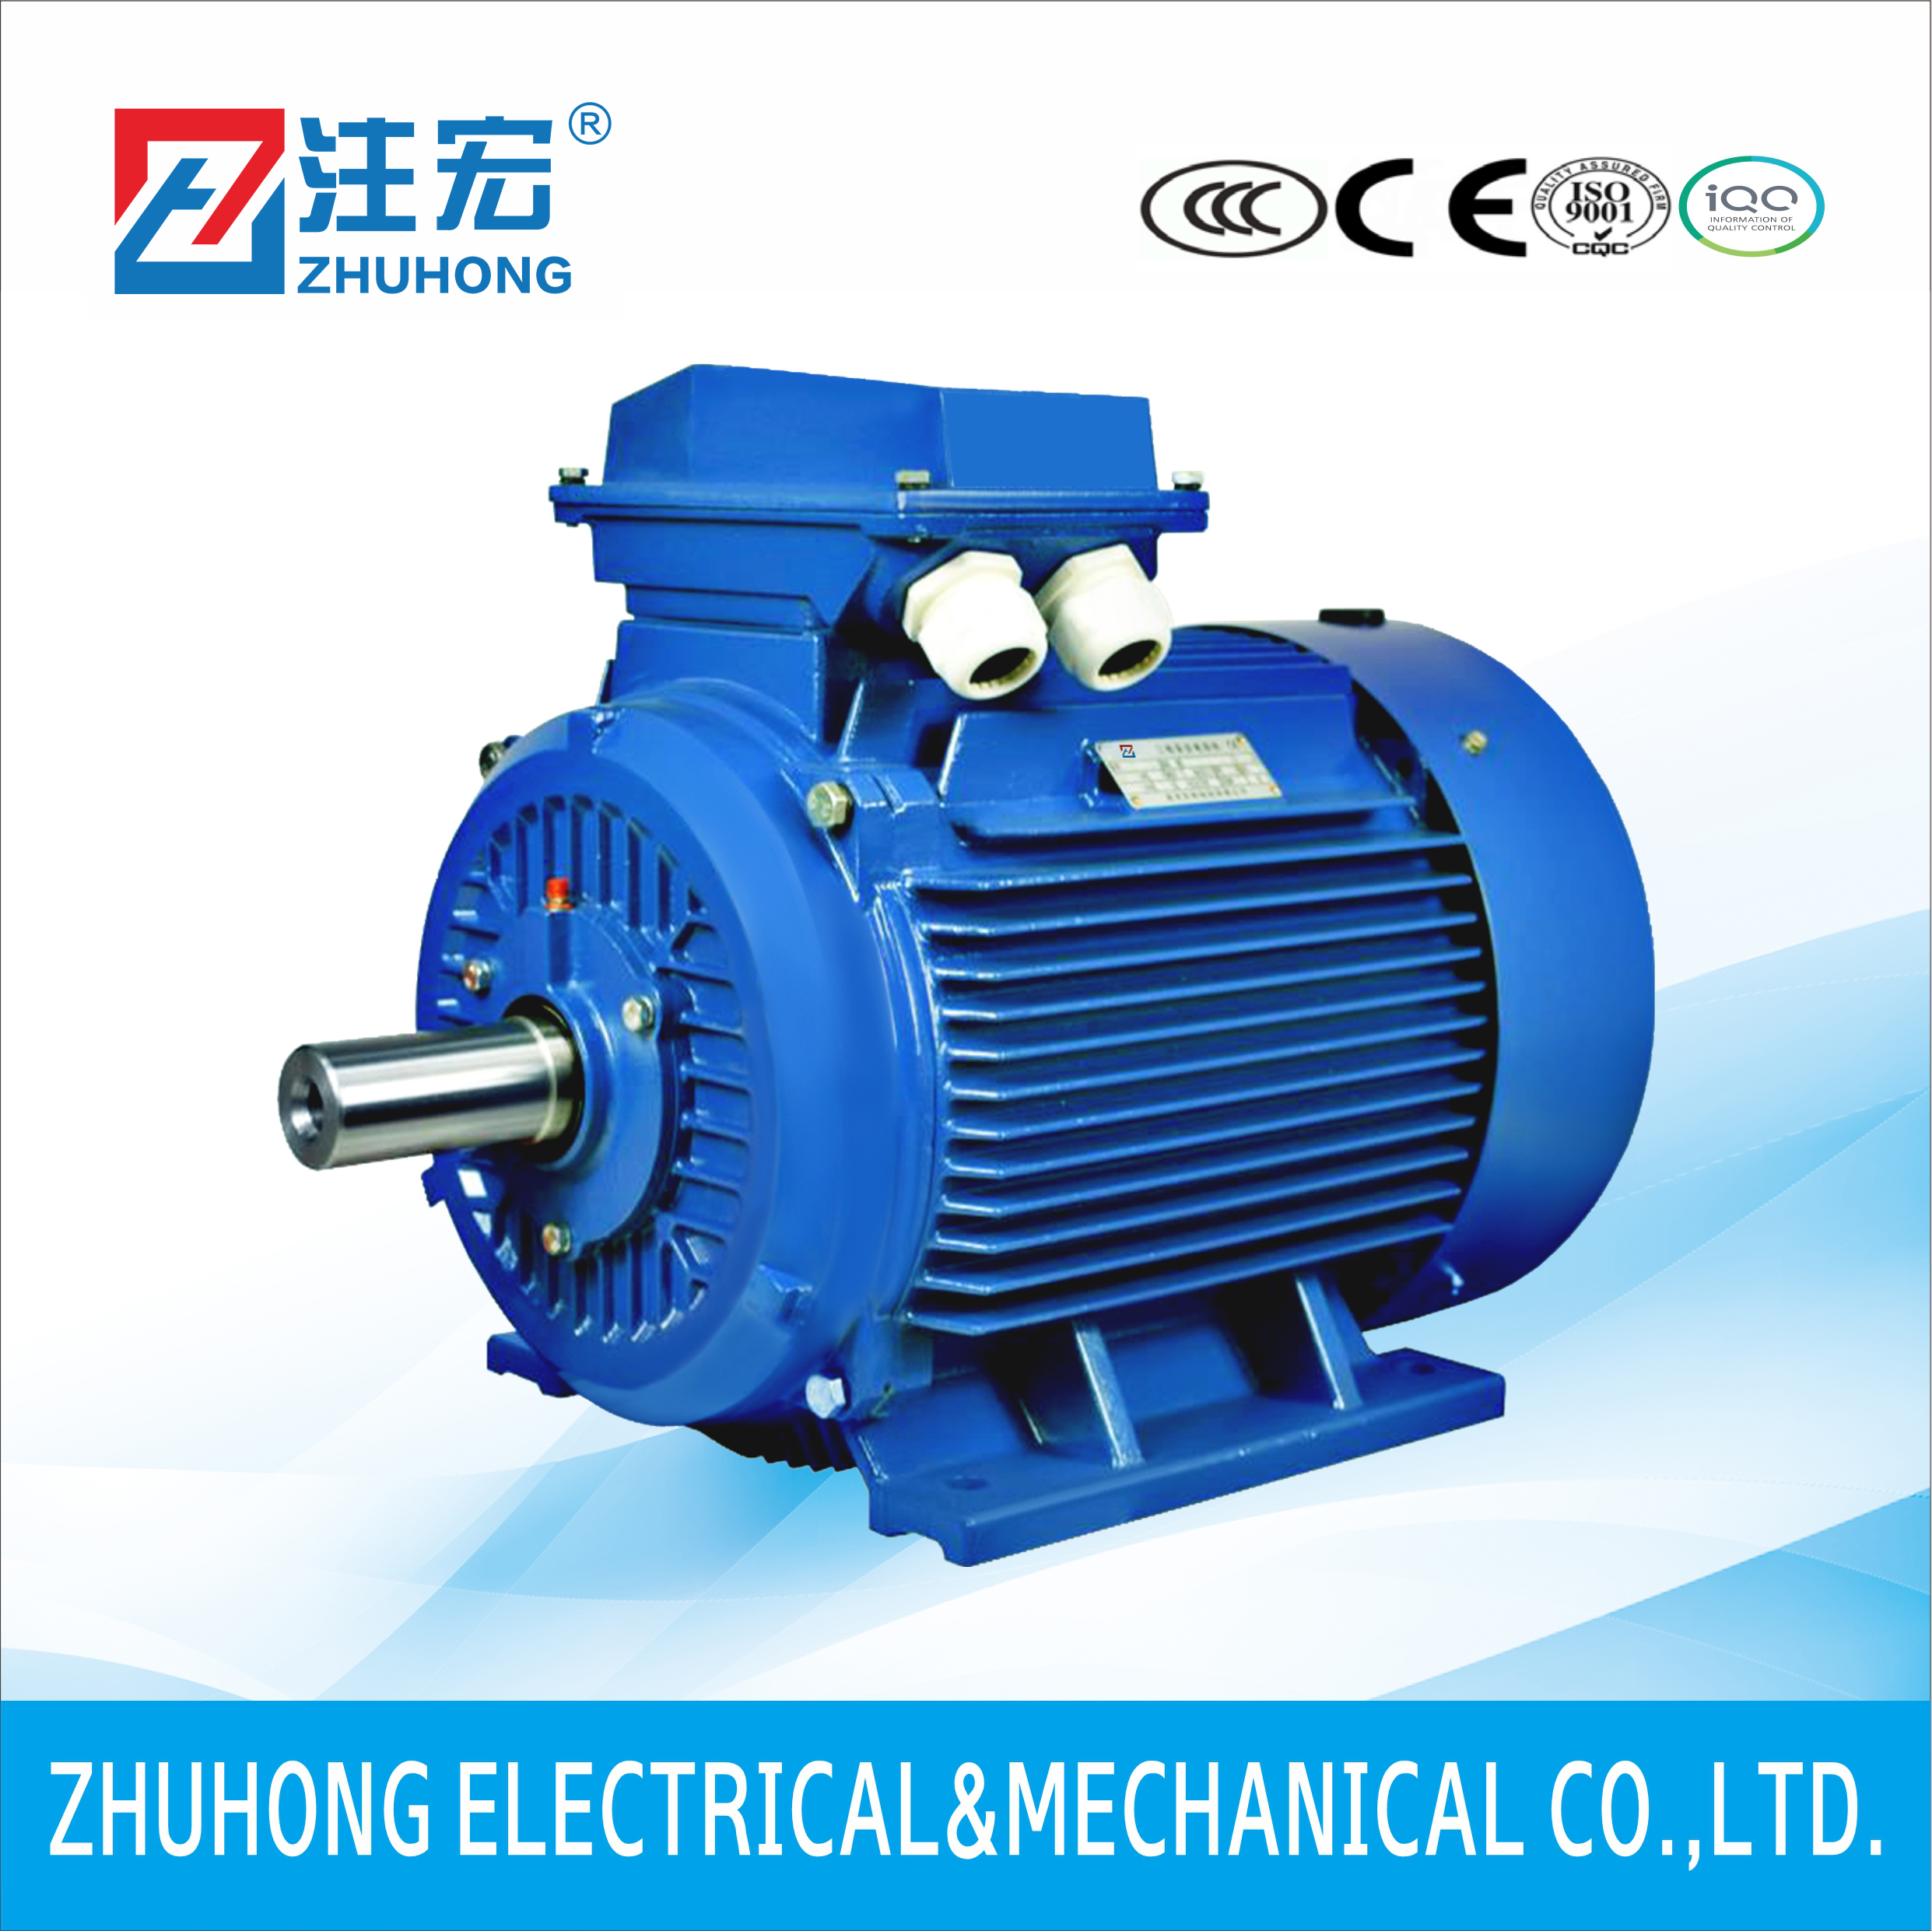 IE3 Series Cast Iron Body Super High Efficiency Three Phase Asynchronous Motor